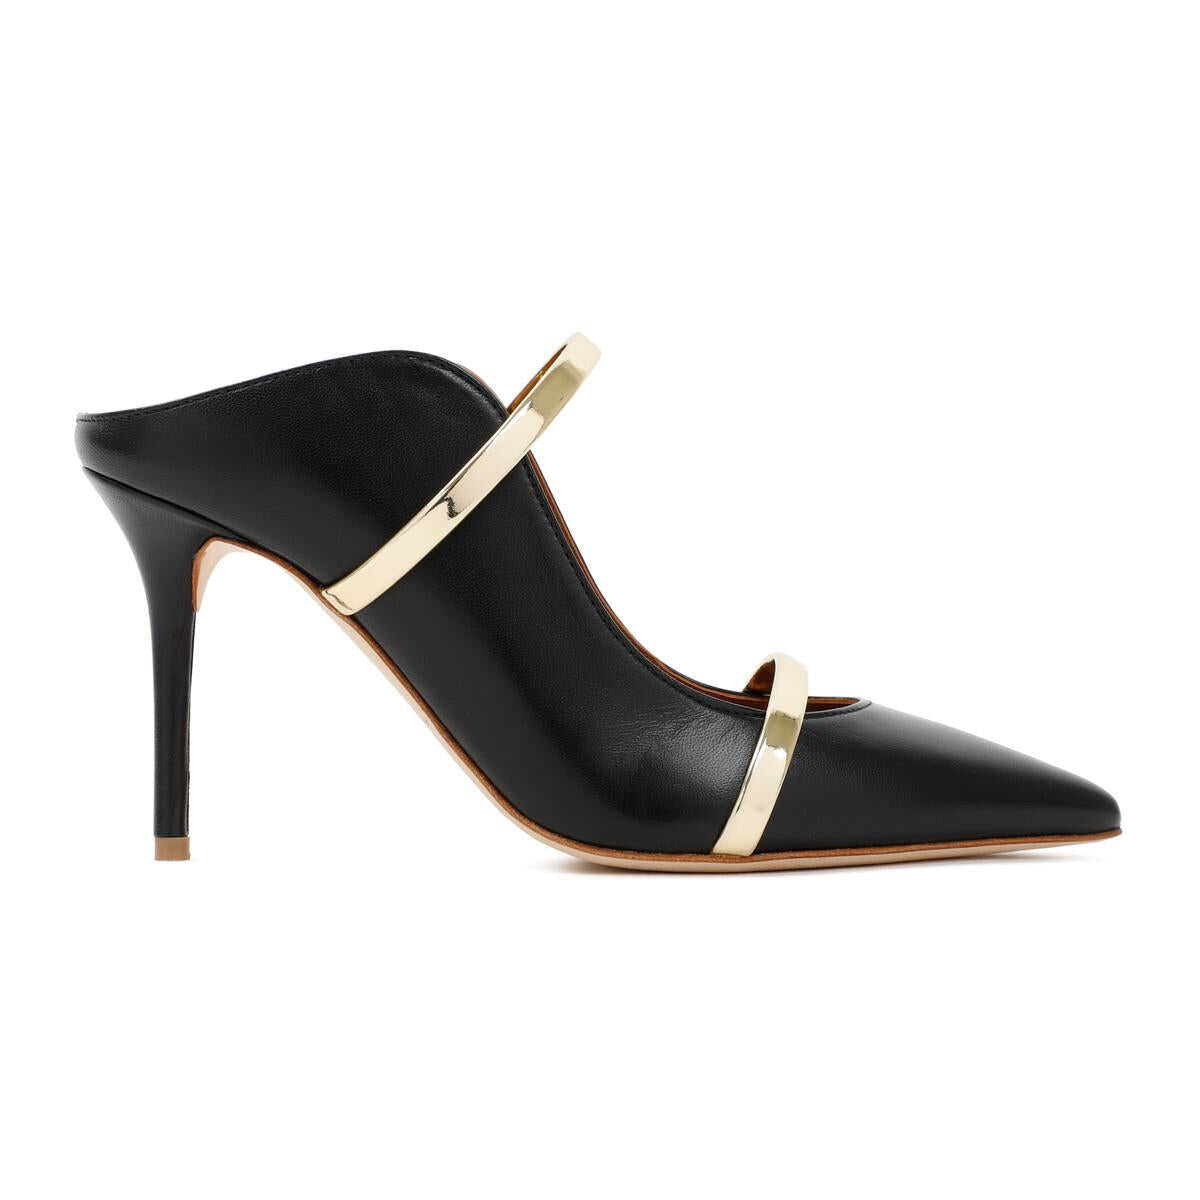 MALONE SOULIERS MALONE SOULIERS MAUREEN 85 MULES SHOES Black